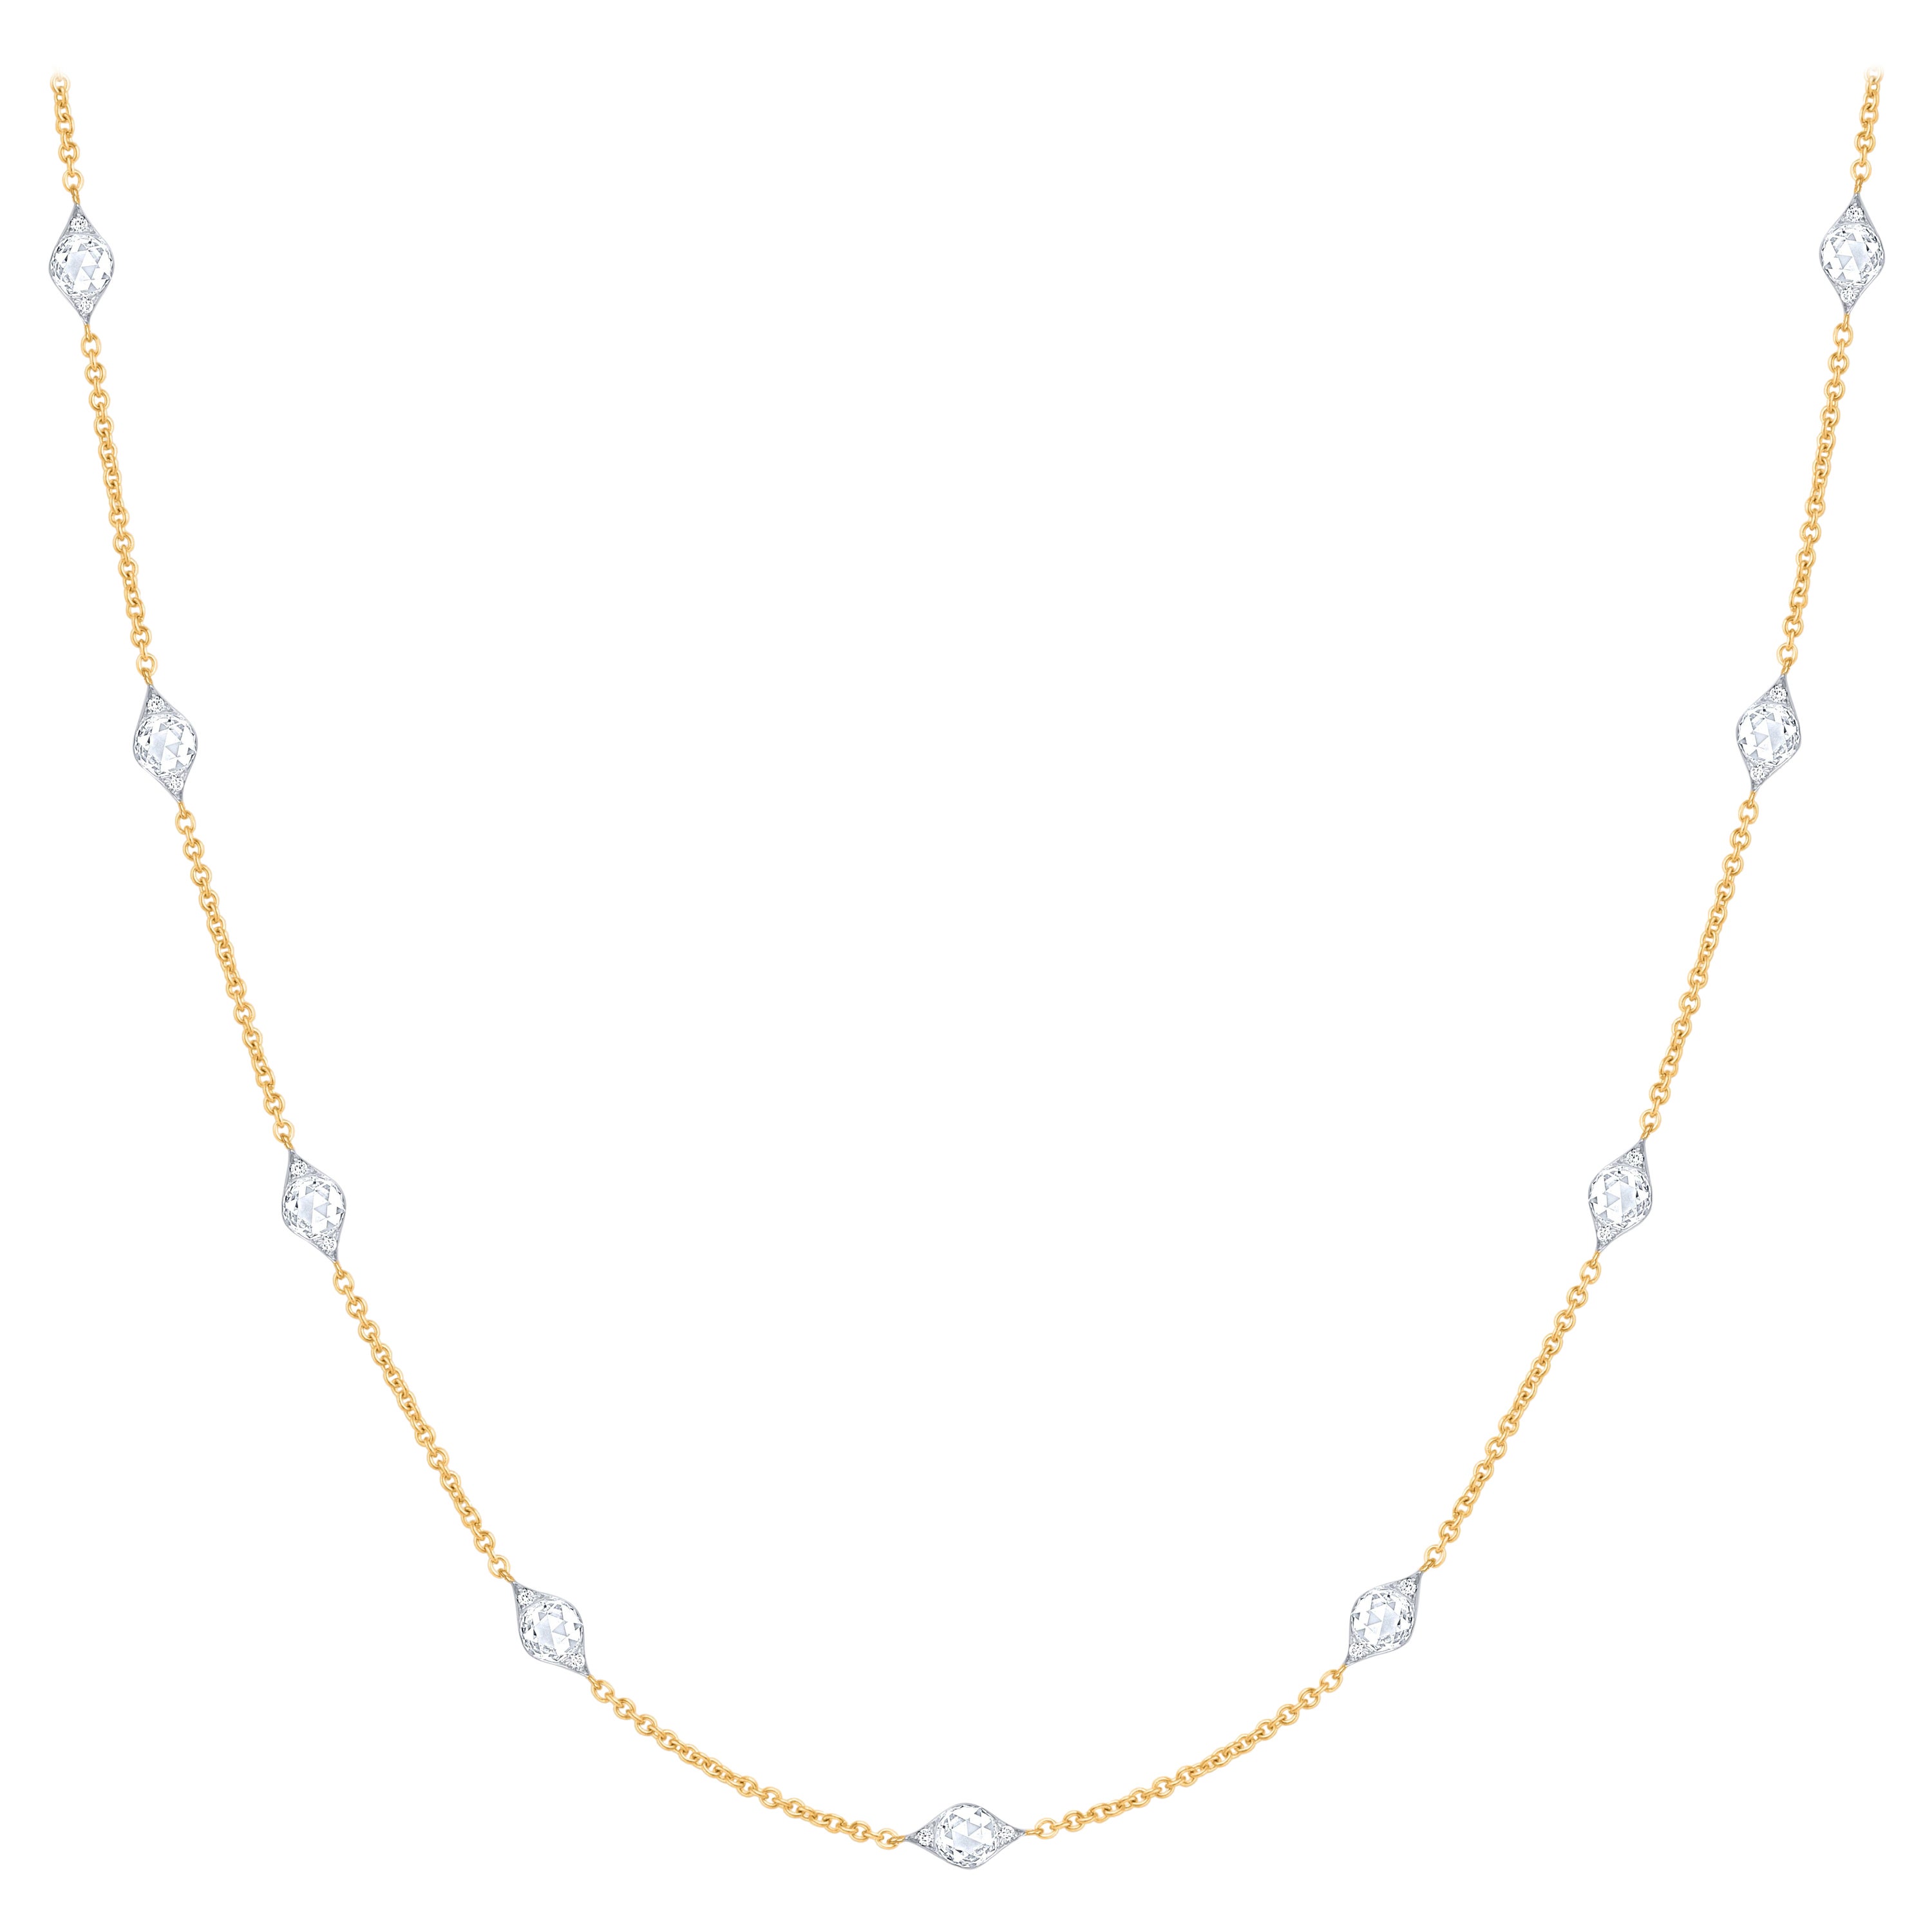 Harakh Colorless Natural Diamond 1.40 Carat Station Necklace in 18 KT Gold For Sale